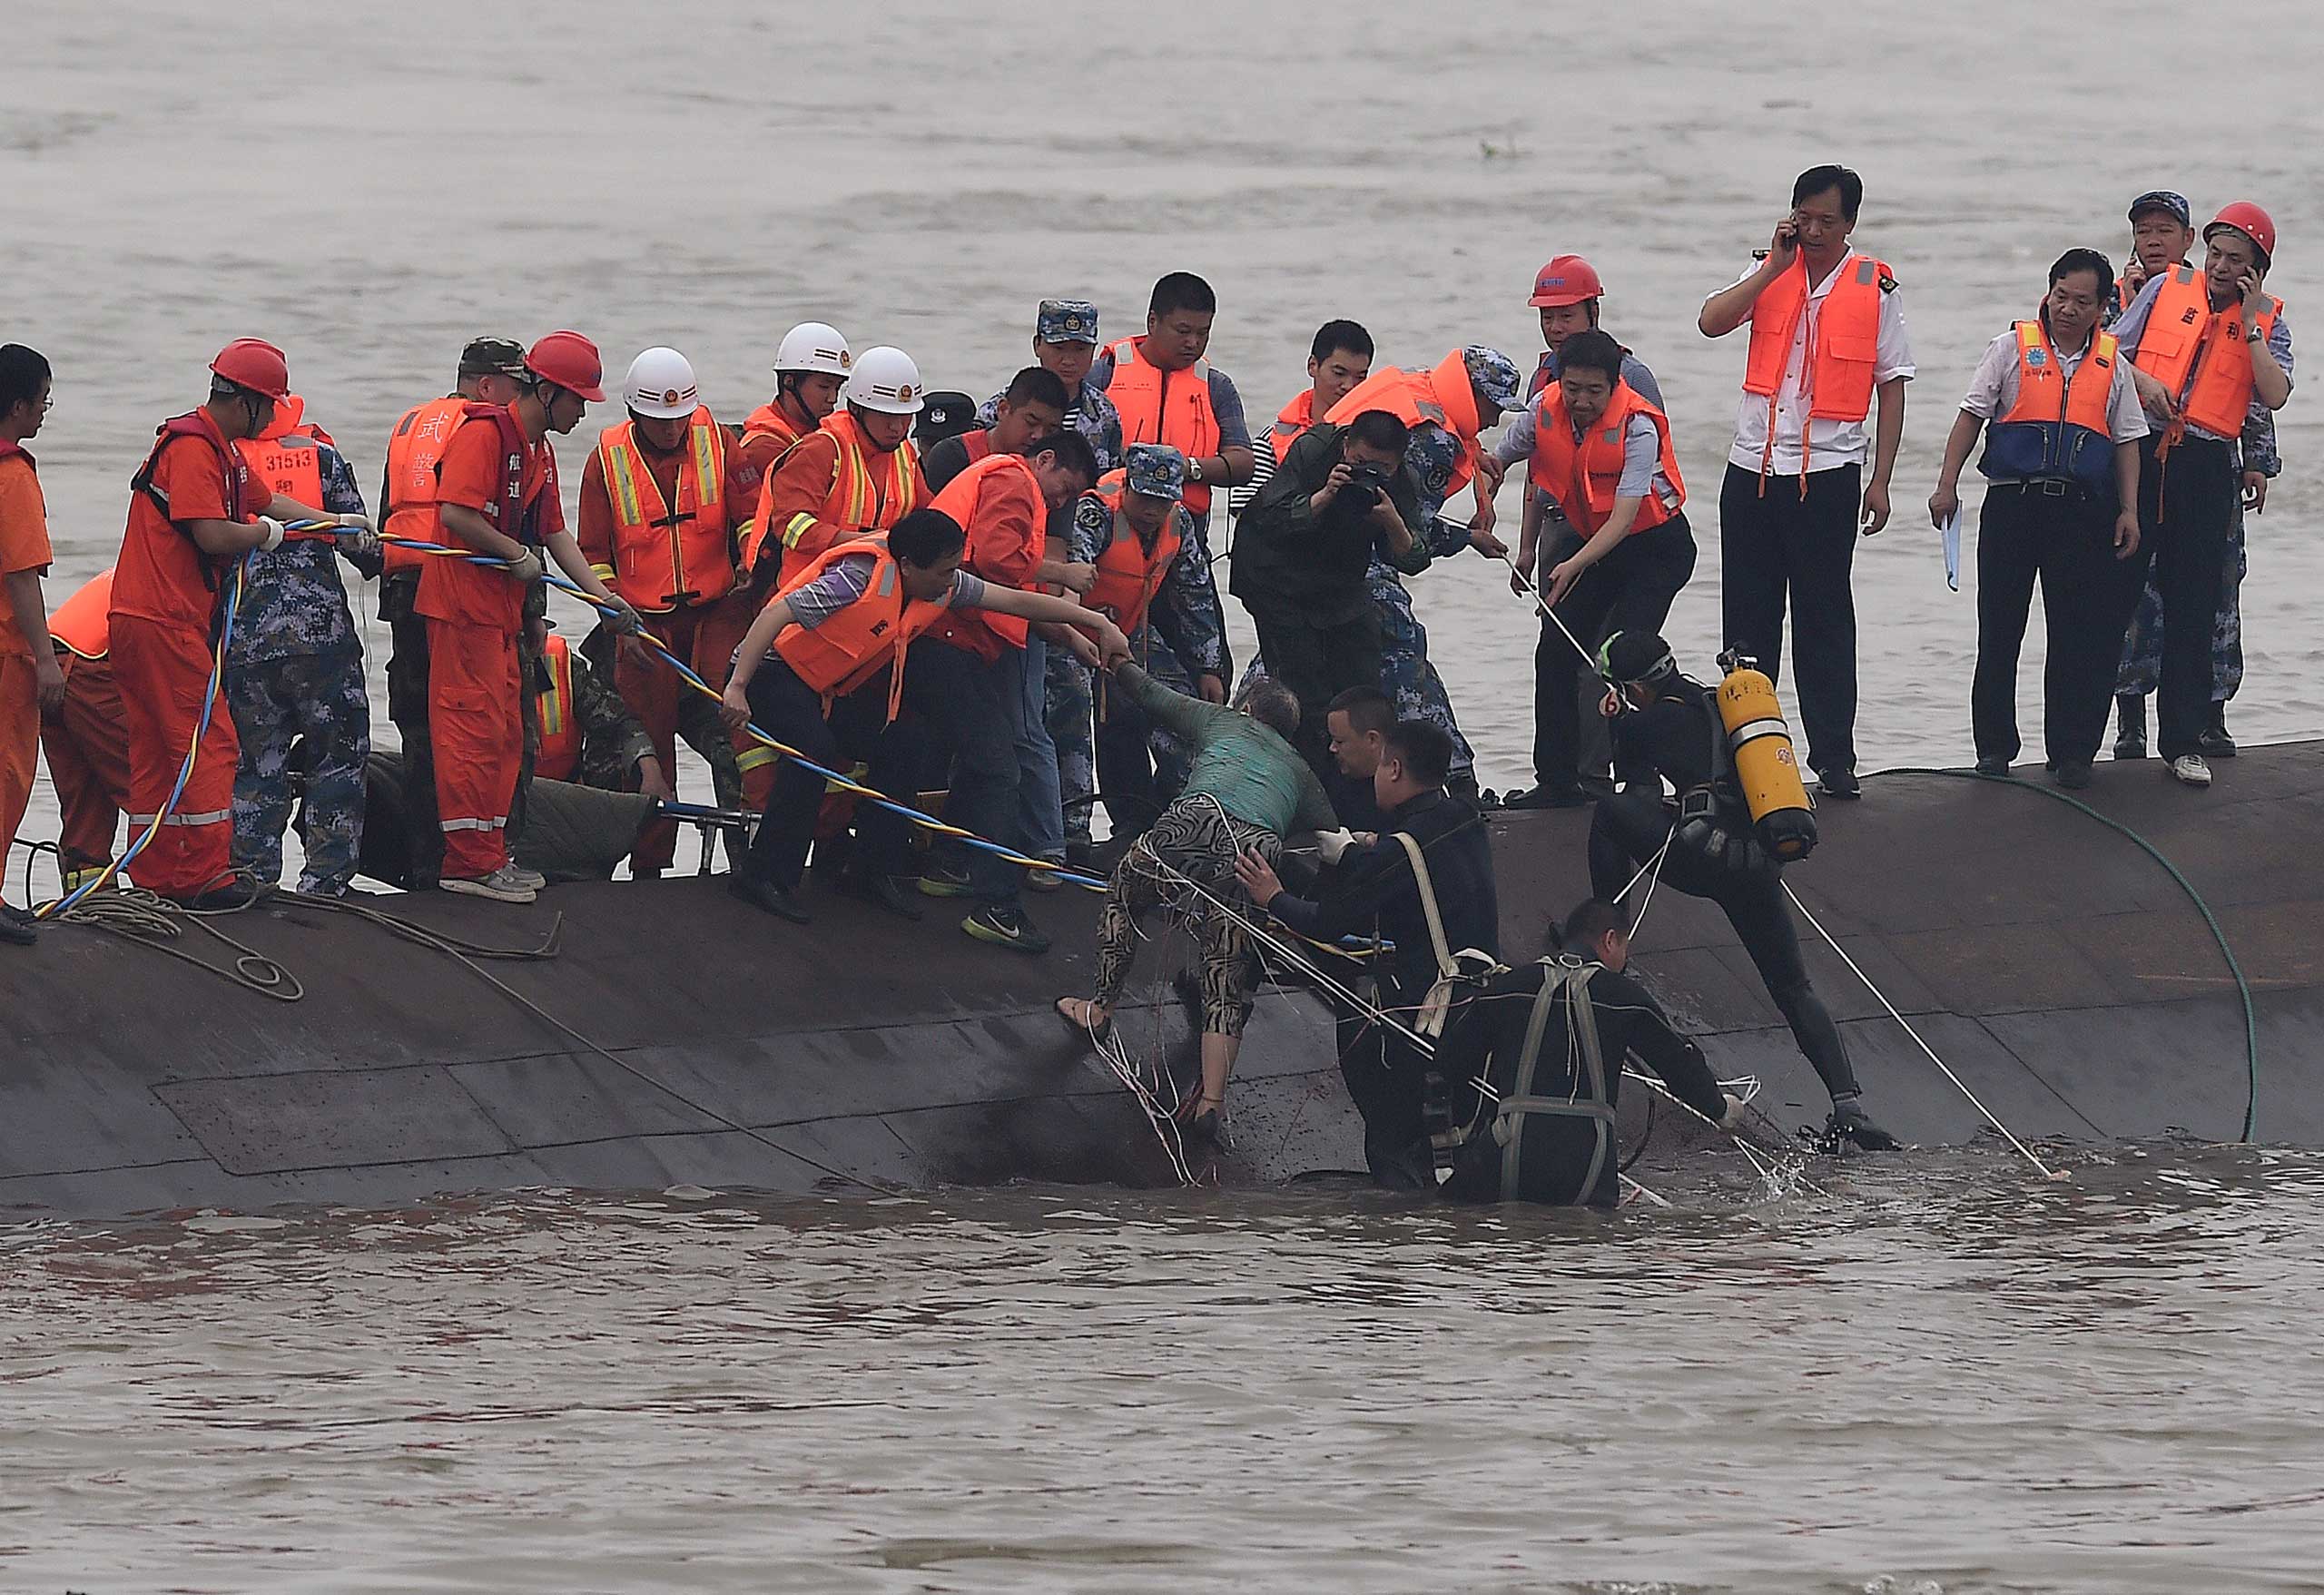 Rescuers save a survivor, center, from the overturned passenger ship in the Jianli section of the Yangtze River in central China's Hubei Province on June 2, 2015.